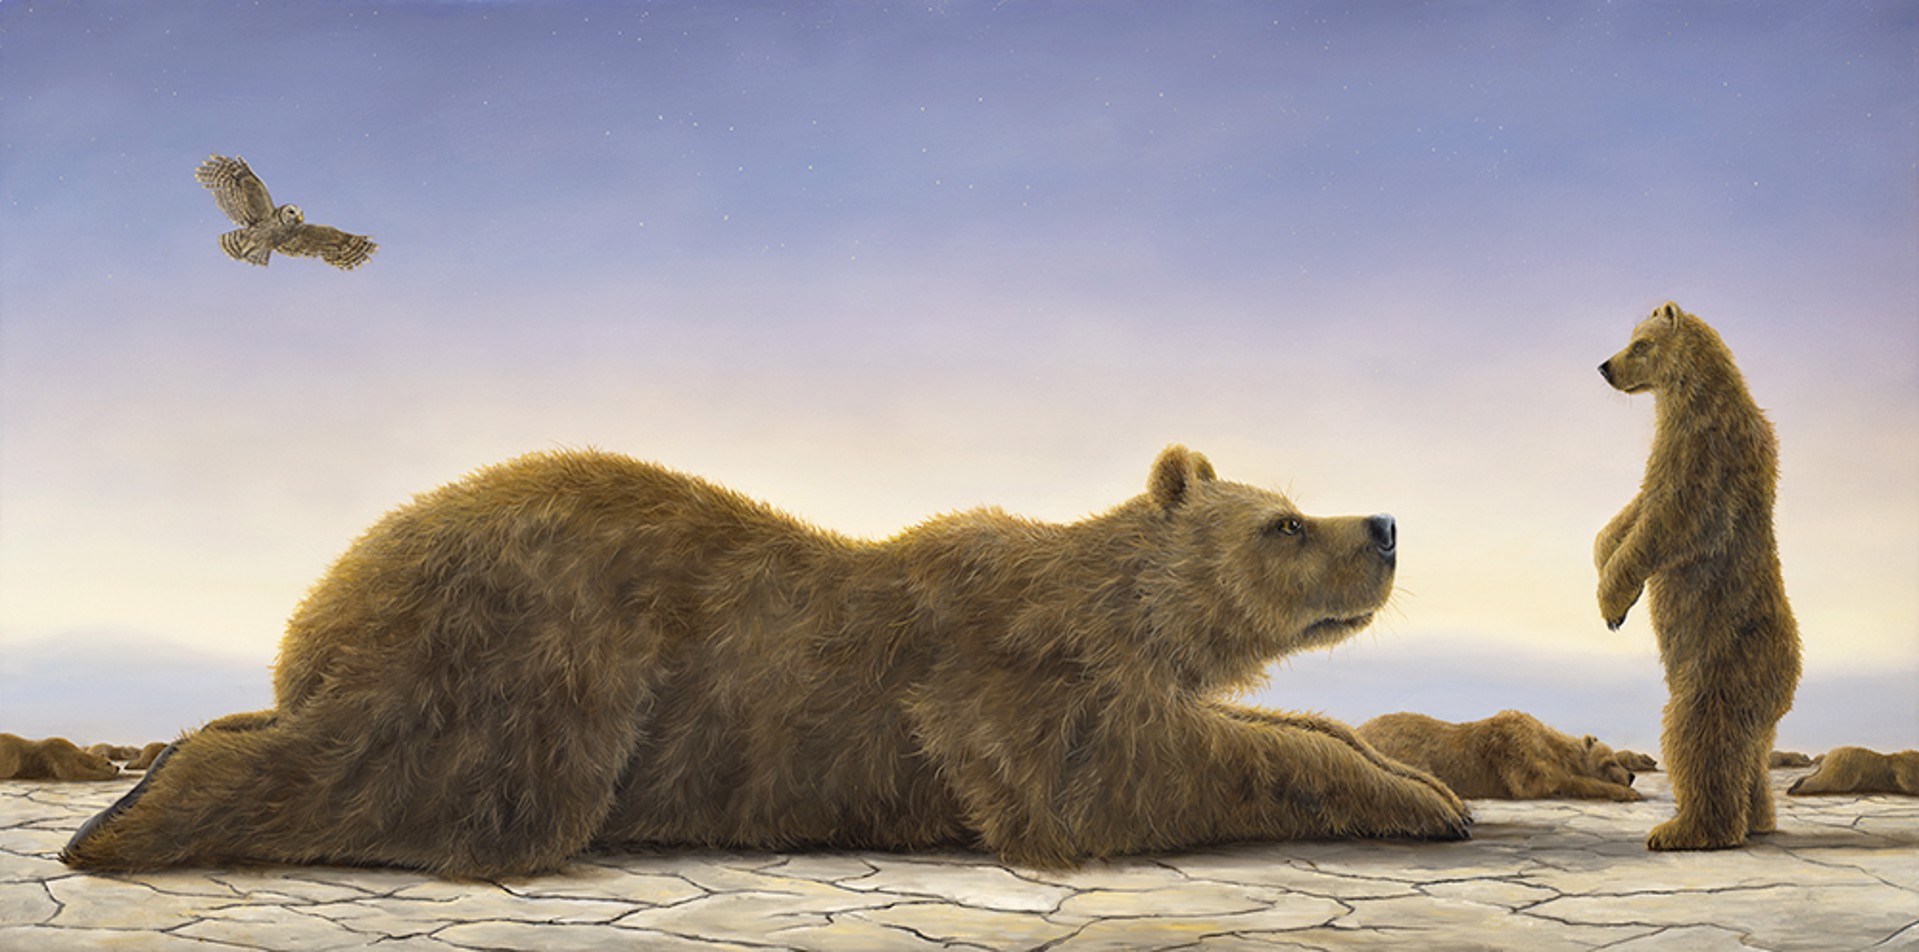 The Dream by Robert Bissell